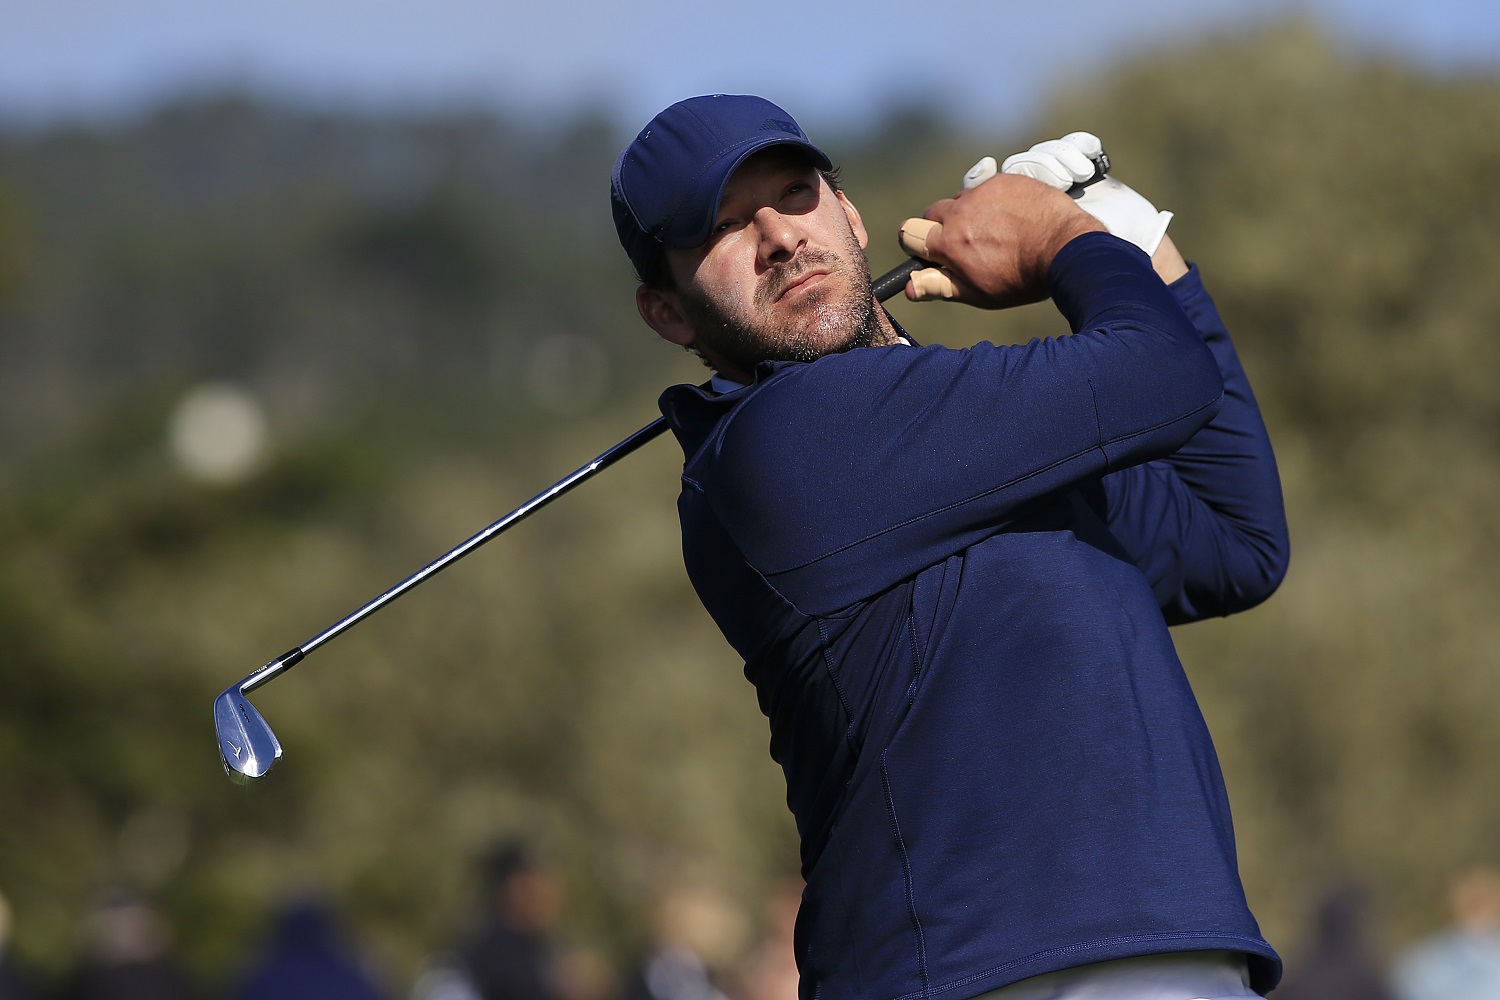 Former NFL player Tony Romo plays from the 17th tee during the AT&T Pebble Beach Pro-Am at Pebble Beach on Feb. 8, 2020.